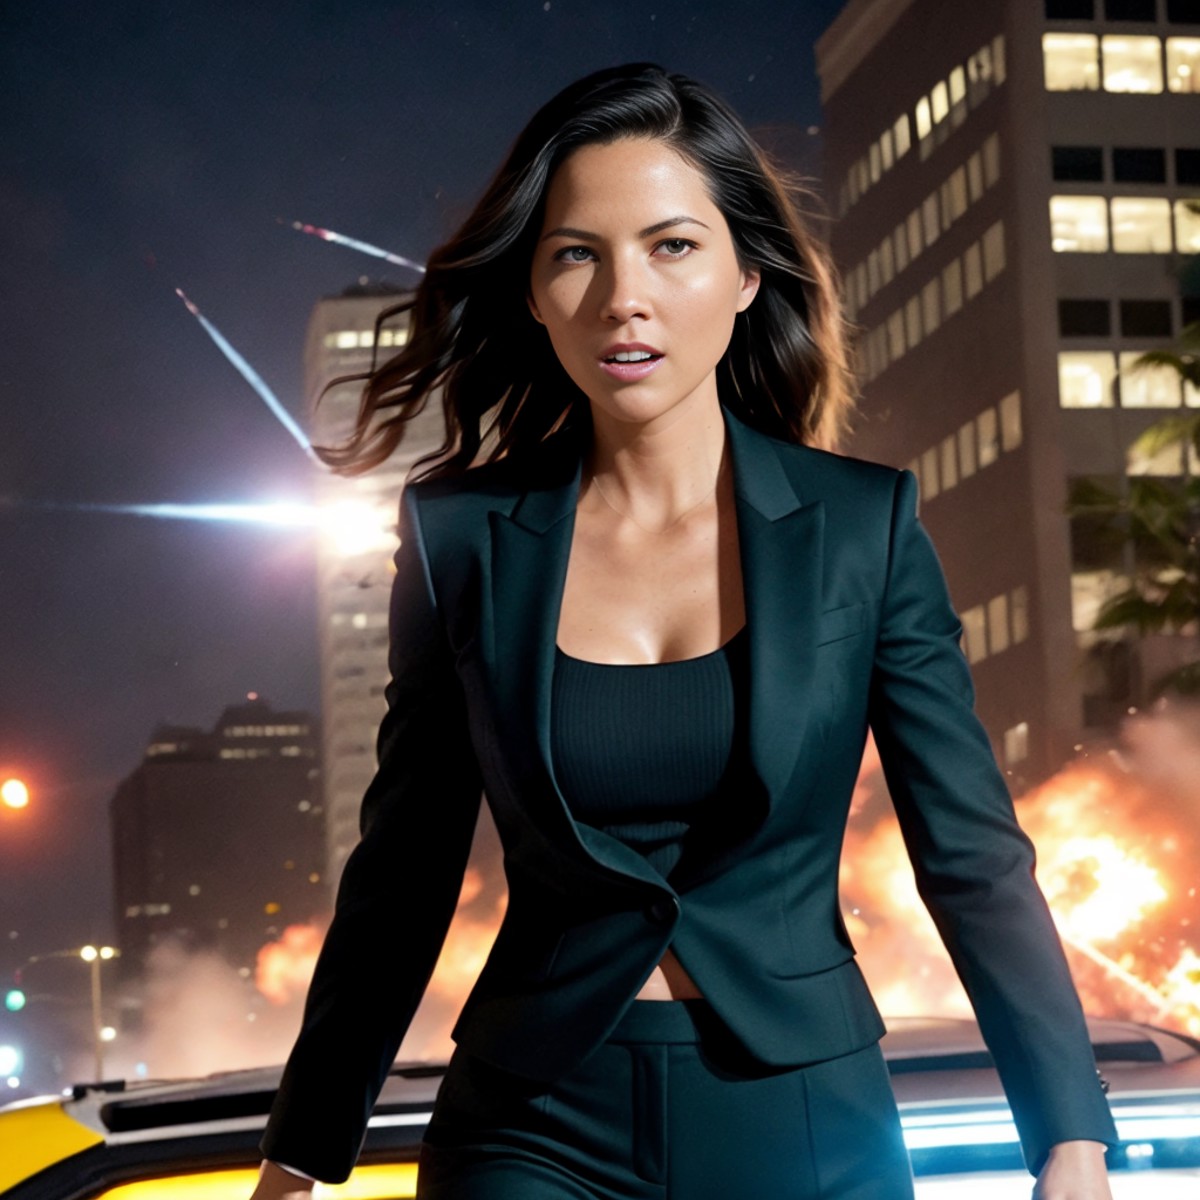 Dynamic radiant photo at a downtown  cityscape at night of a female Hardboiled detective oliviamunn with intense defined f...